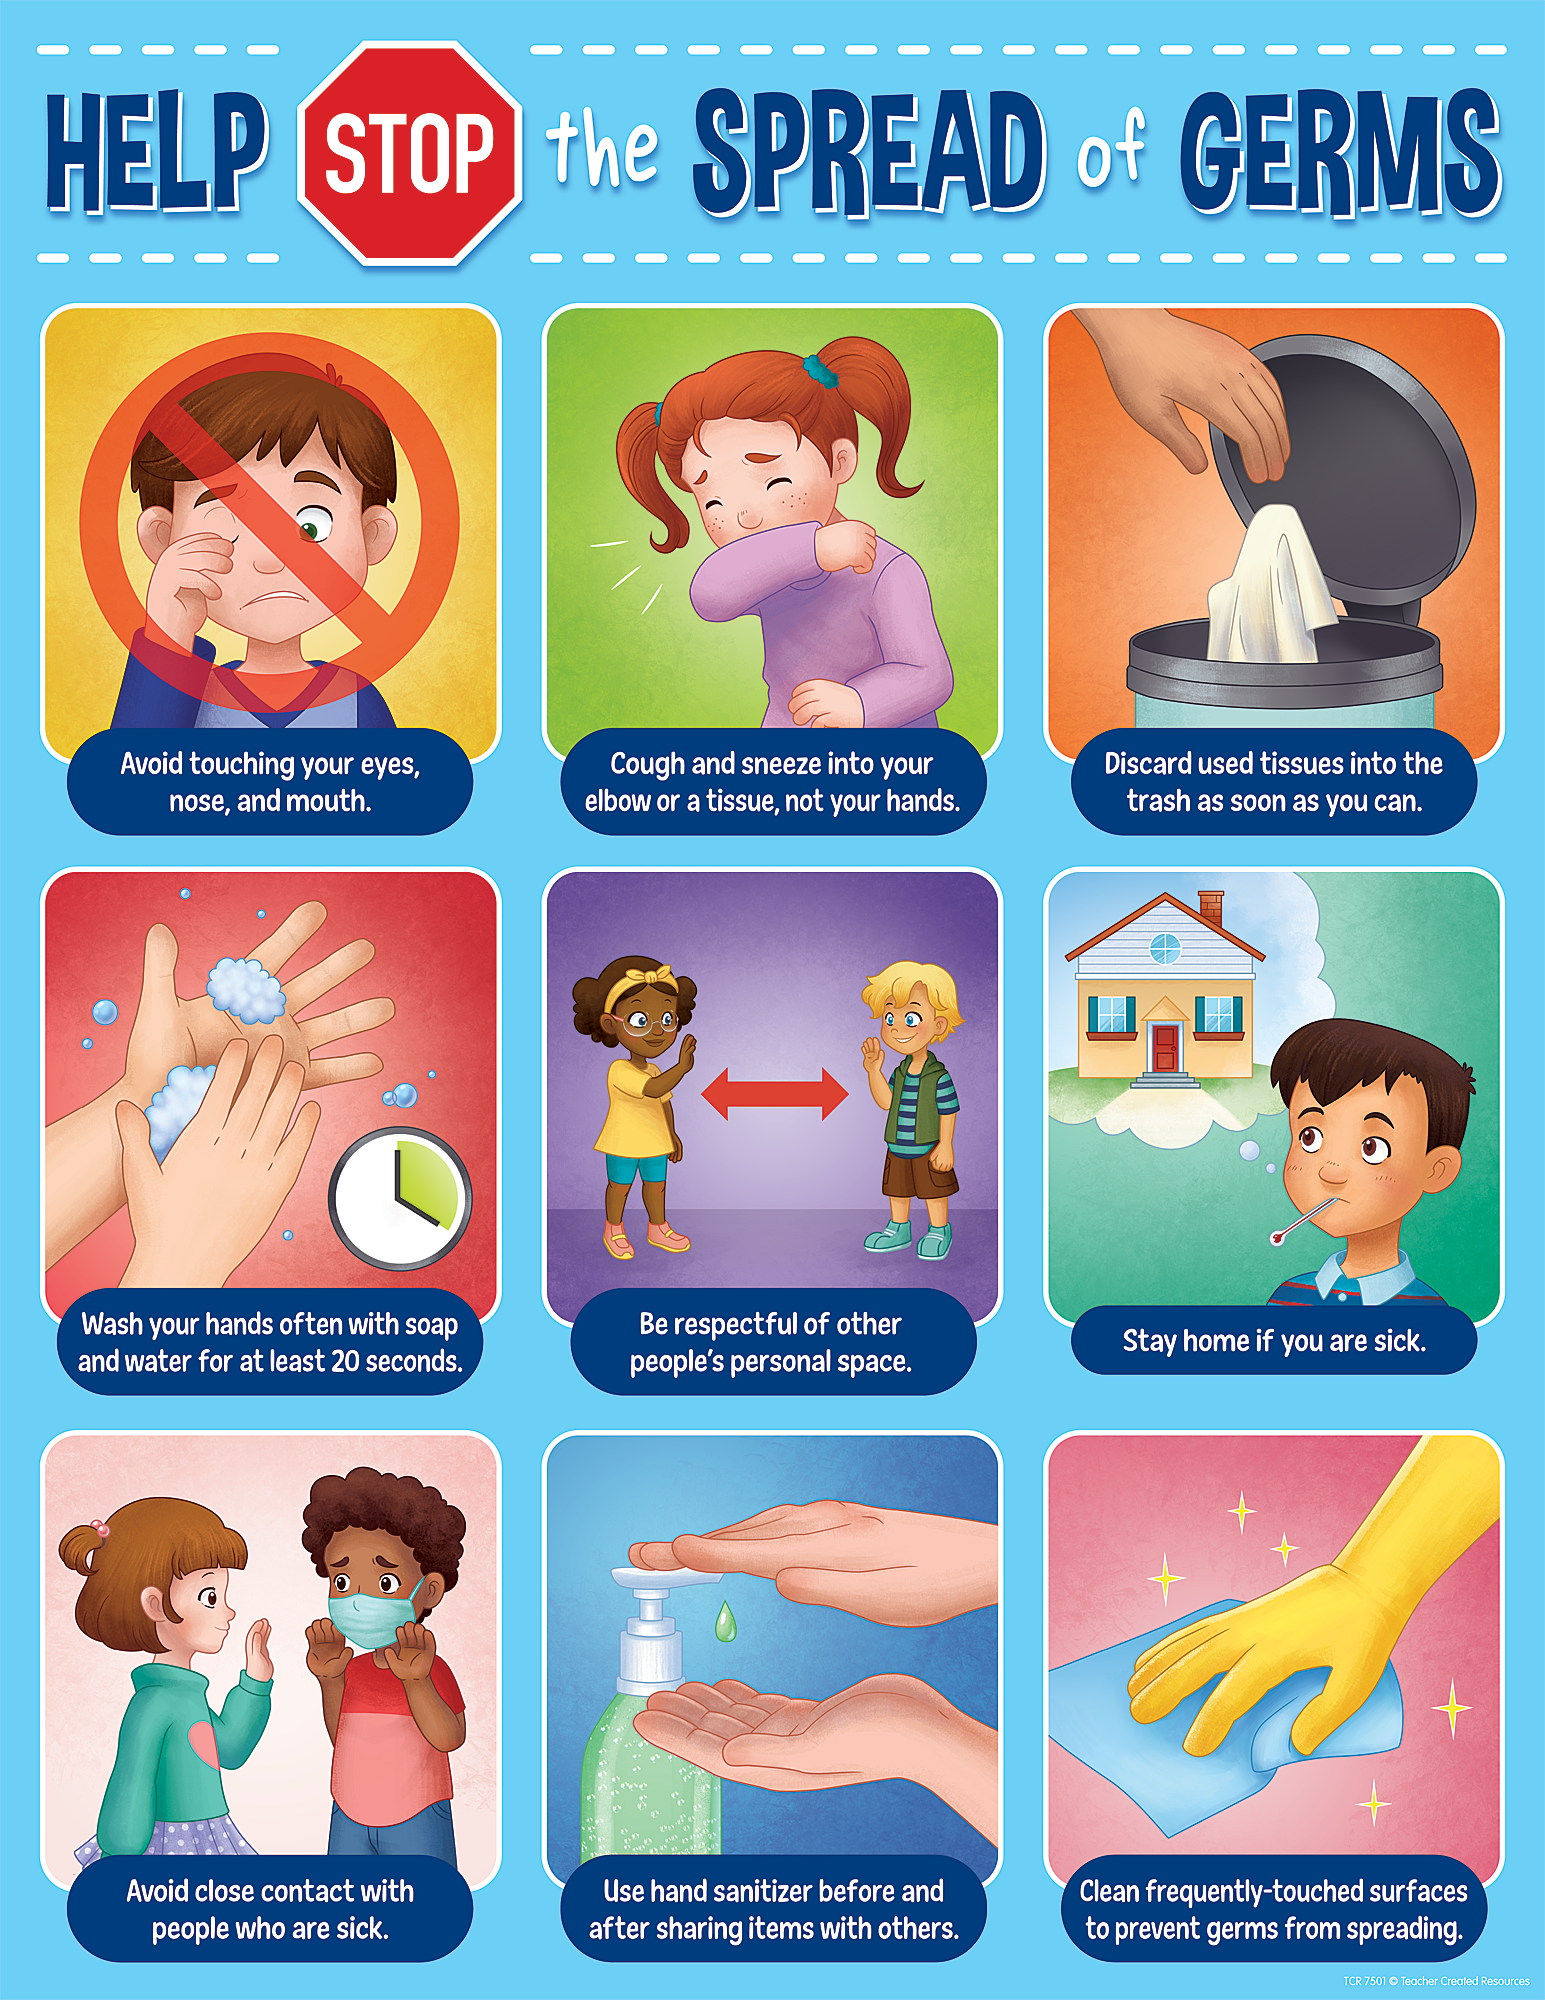 Remind students about the importance of fighting the spread of germs and best practices for keeping themselves and others safe and healthy. Perfect for displaying in classrooms, libraries, lunchrooms, and school offices.